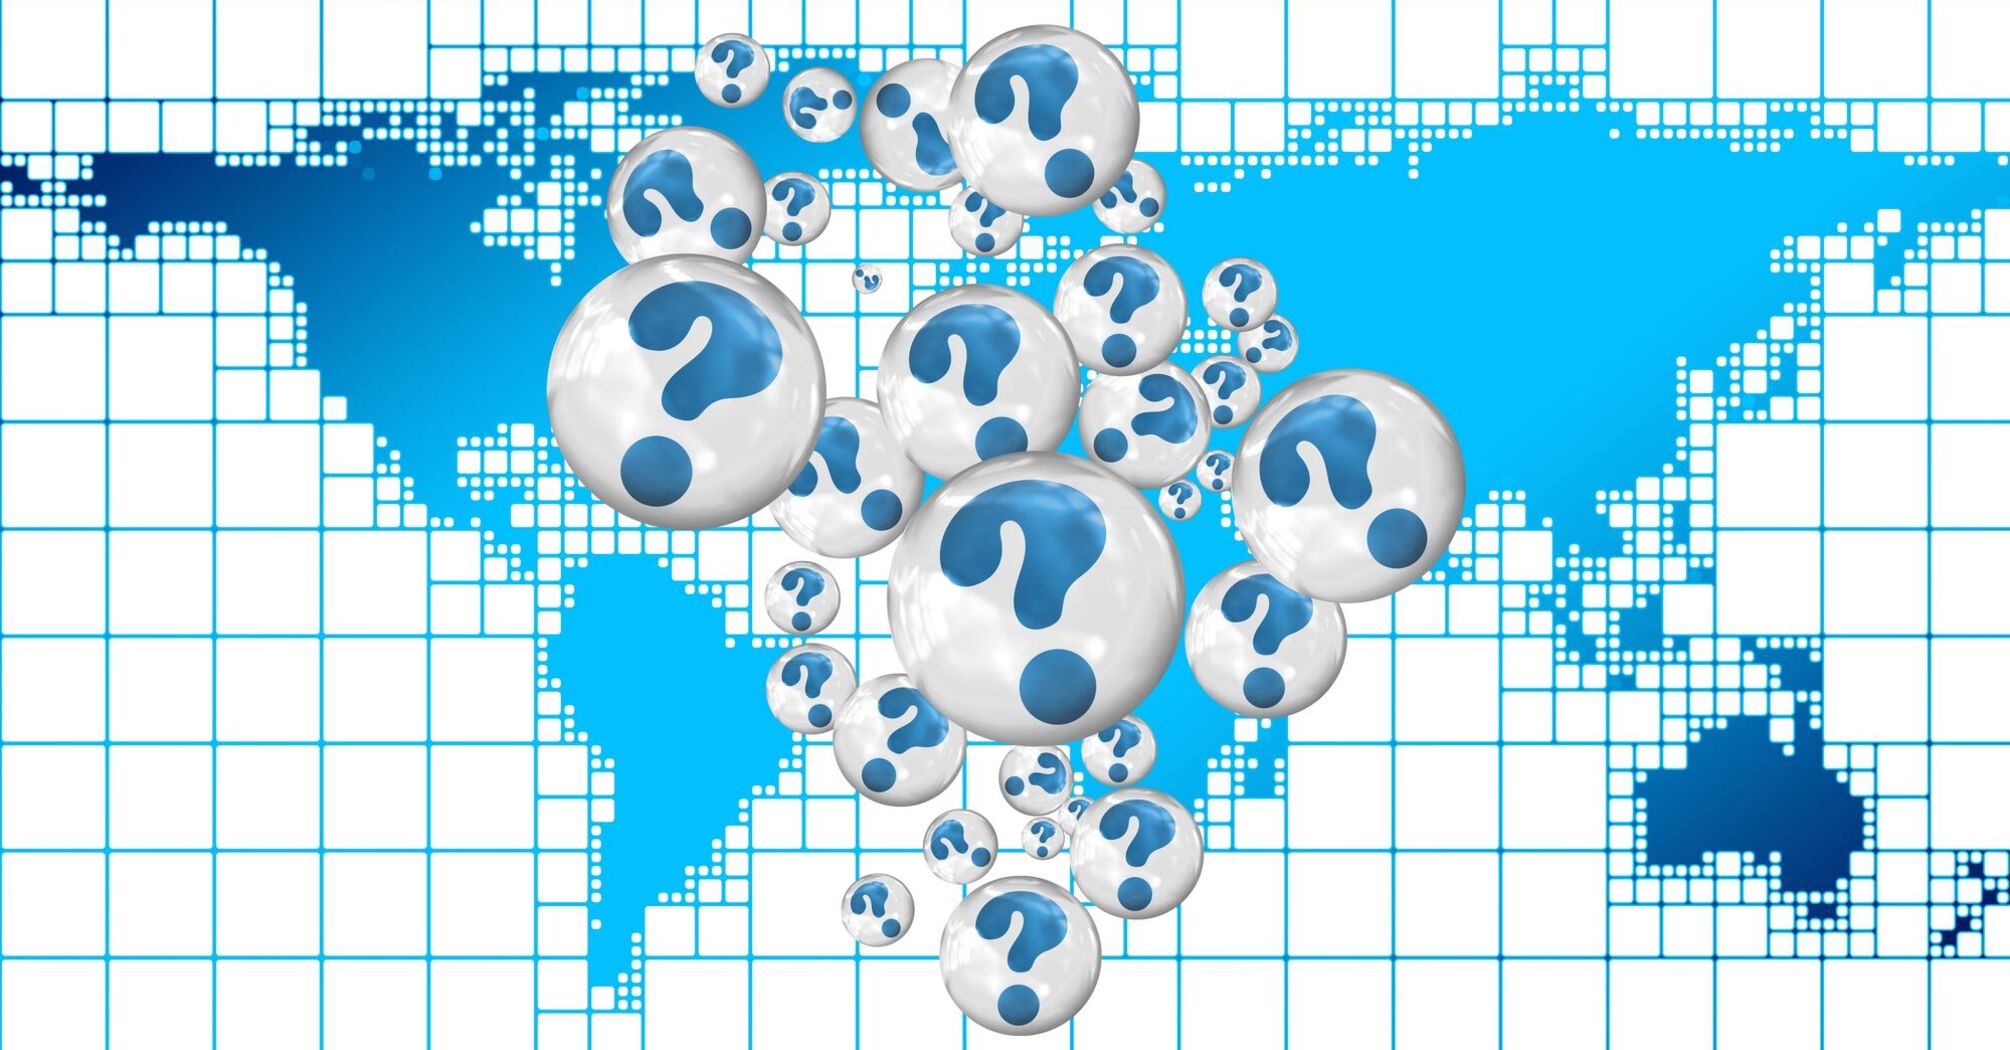 A digital image featuring numerous white question marks inside bubbles over a blue background with a pixelated world map design